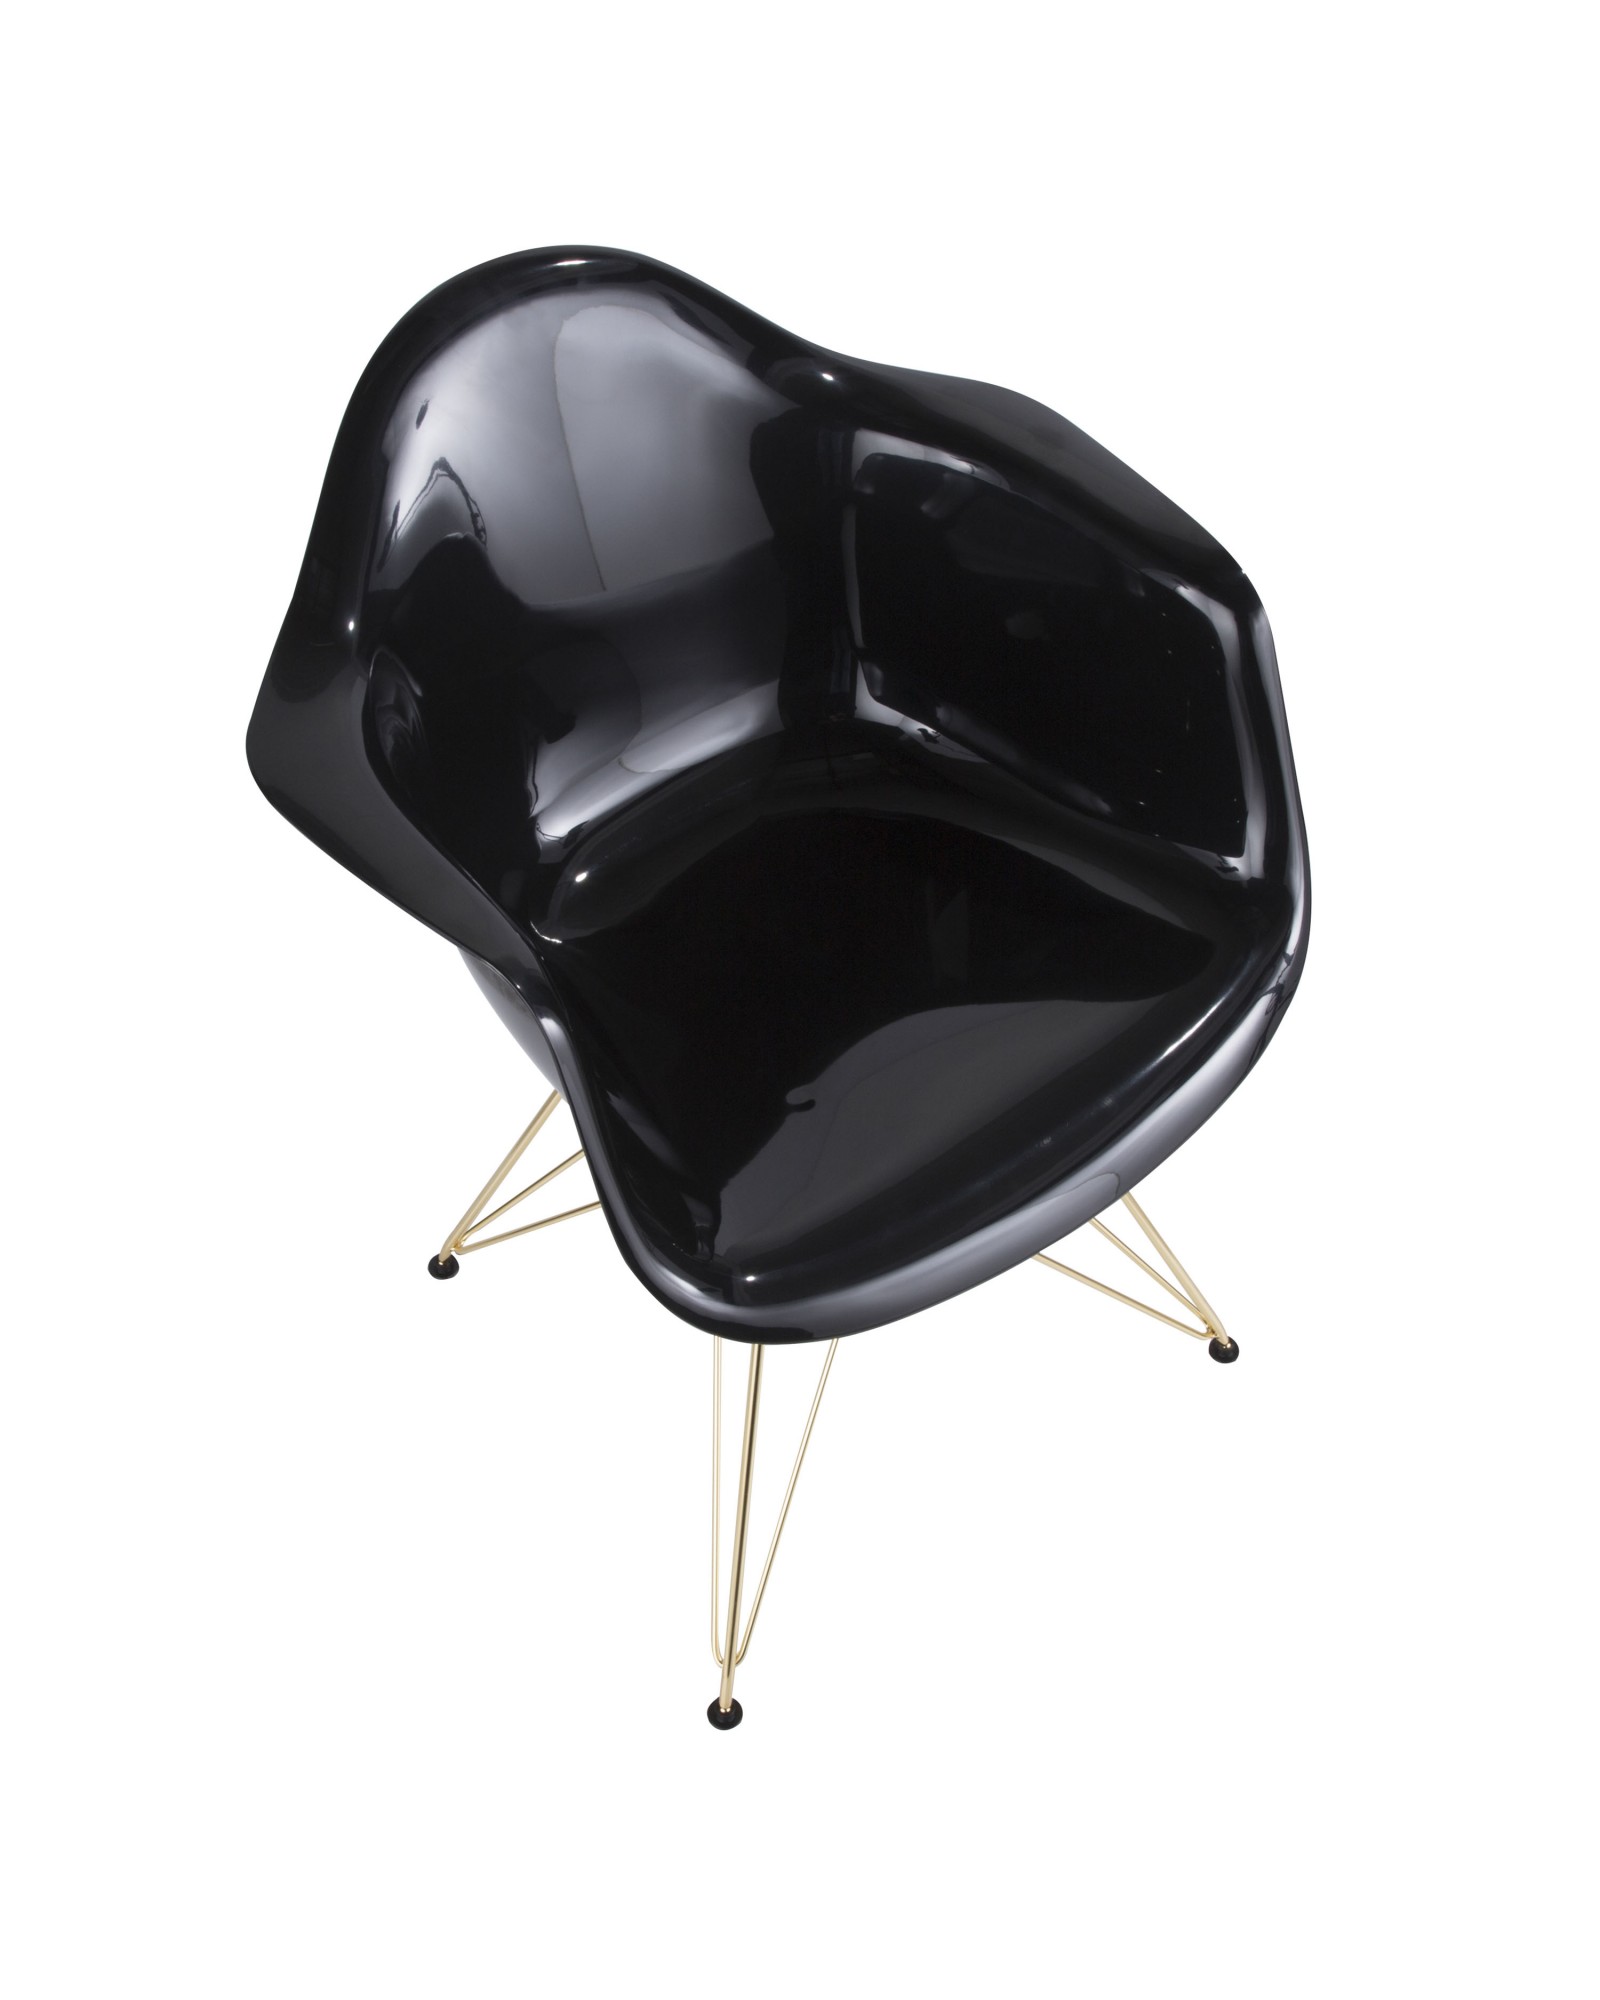 Neo Flair Contemporary Dining/Accent Chair in Black and Gold